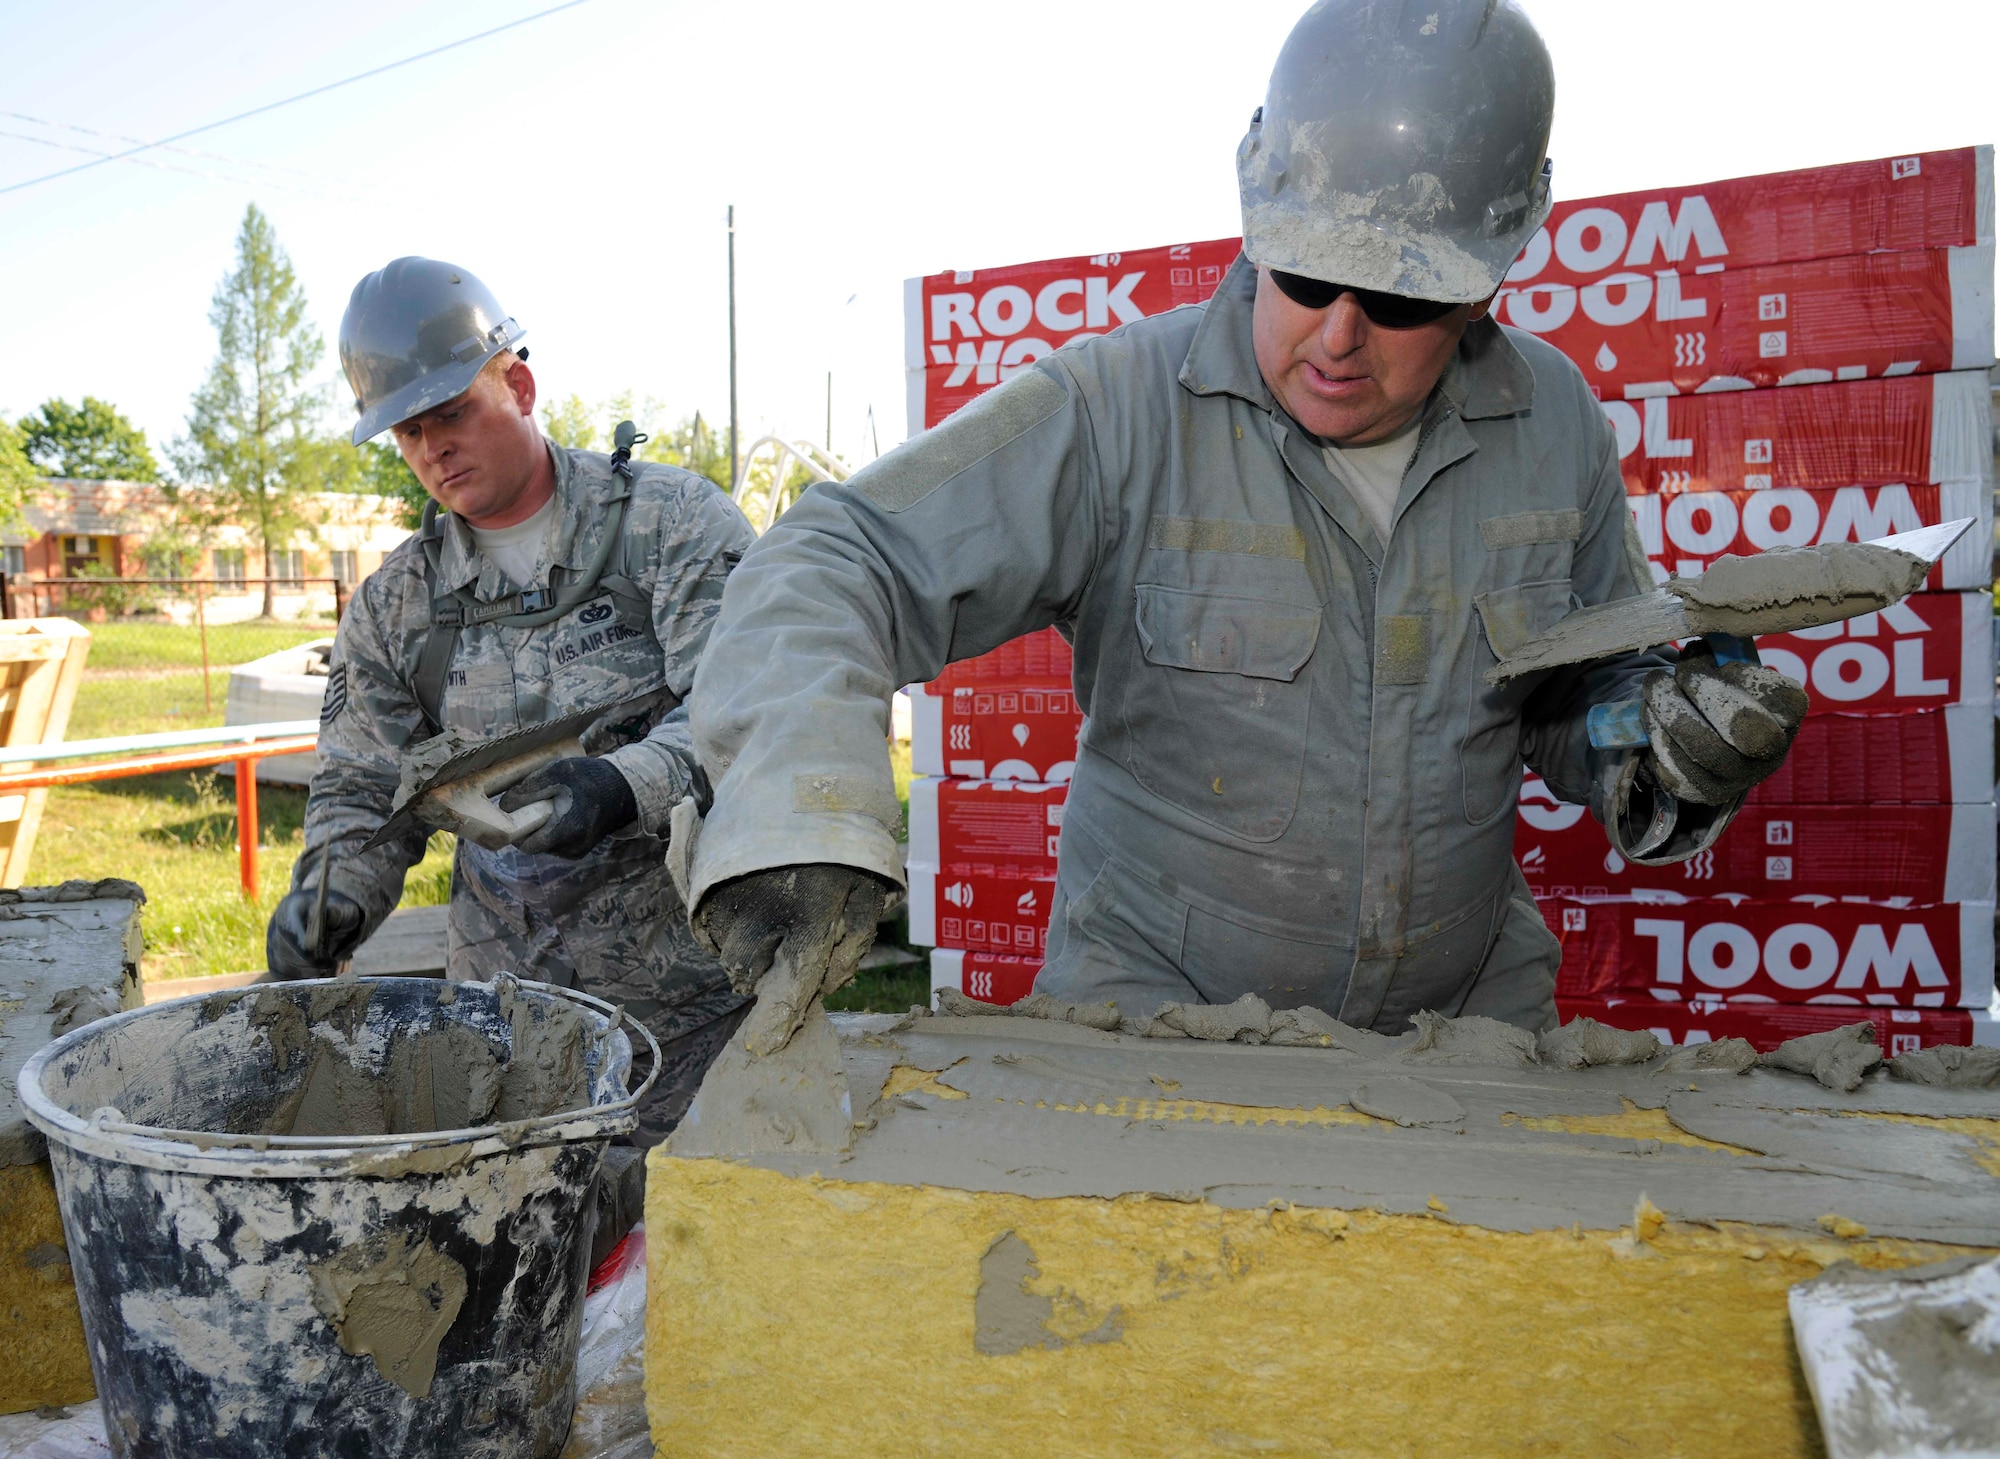 Staff Sgt. John Martin, 127th Civil Engineering Squadron pavements and construction supervisor and Tech. Sgt. Ed Hirth, 127th CES firefighter, apply a mud adhesive to rock wool insulation at a kindergarten in Silmala, Latvia on June 23, 2016. The school is currently undergoing a Humanitarian-civic assistance project to provide the school with up to date renovations. (U.S. Air National Guard photo by Senior Airman Ryan Zeski)